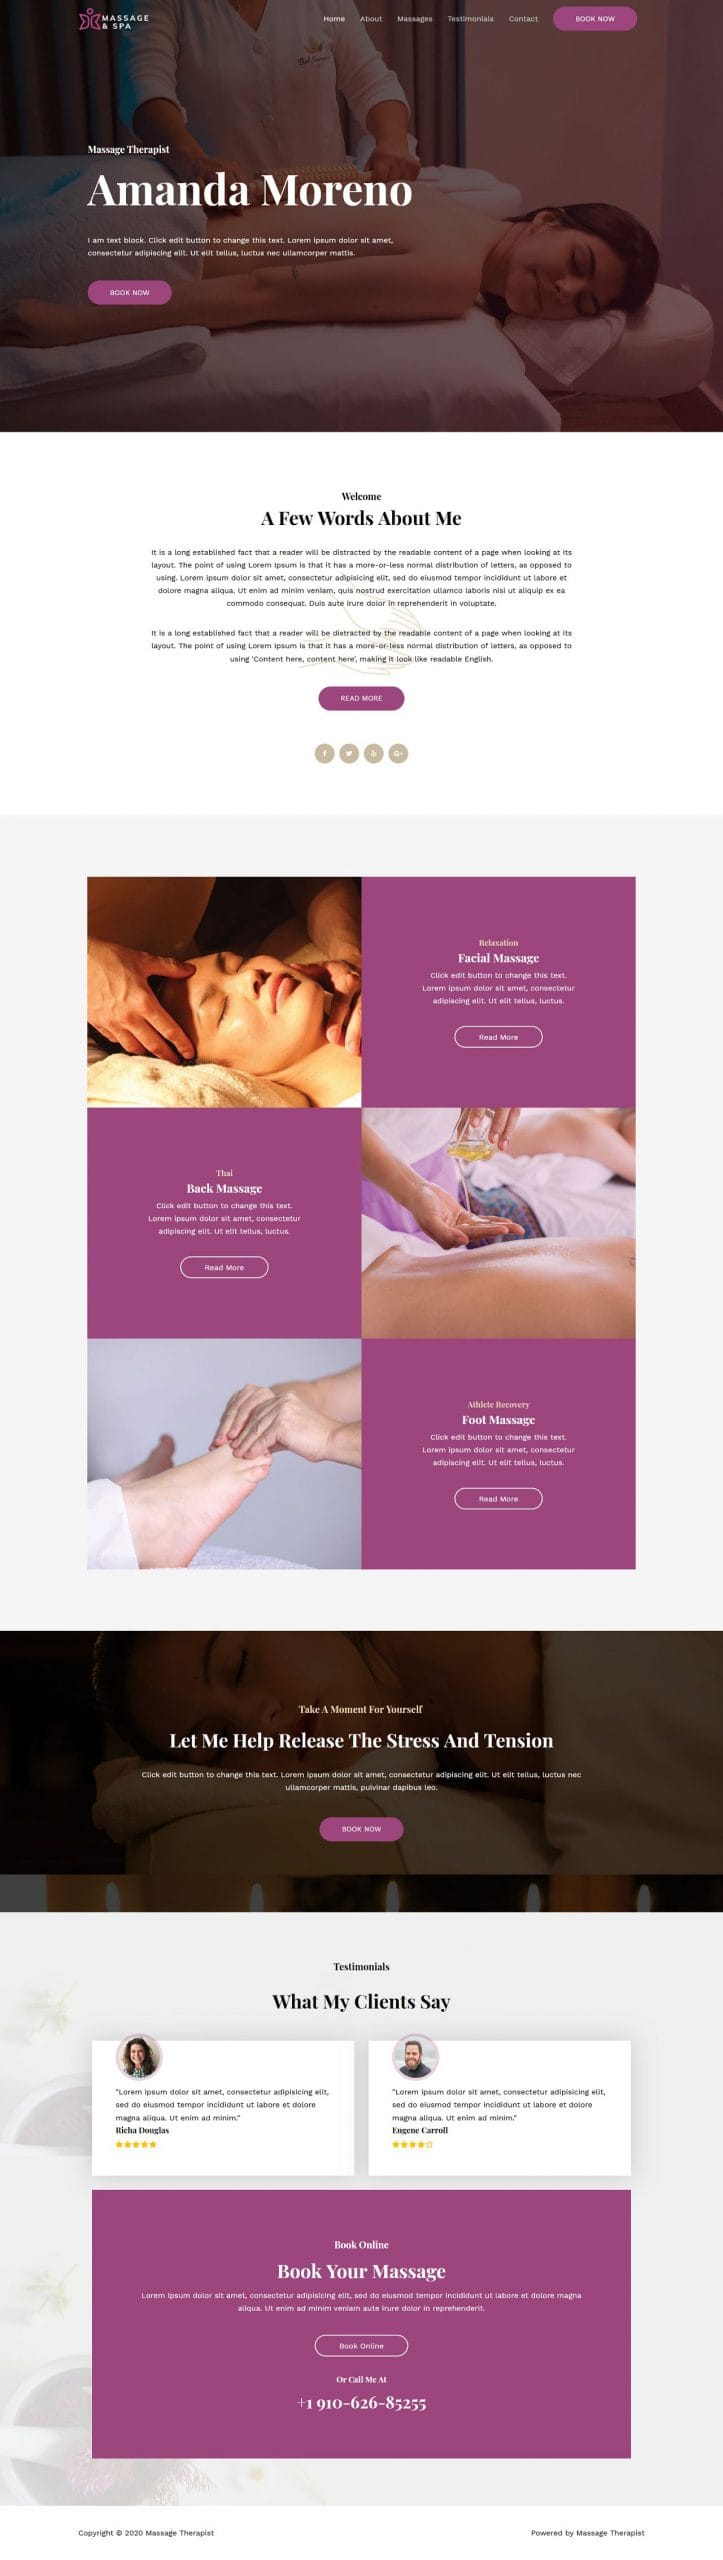 Fagowi.com Website Design Templates For Massage Therapist - Home Page Image